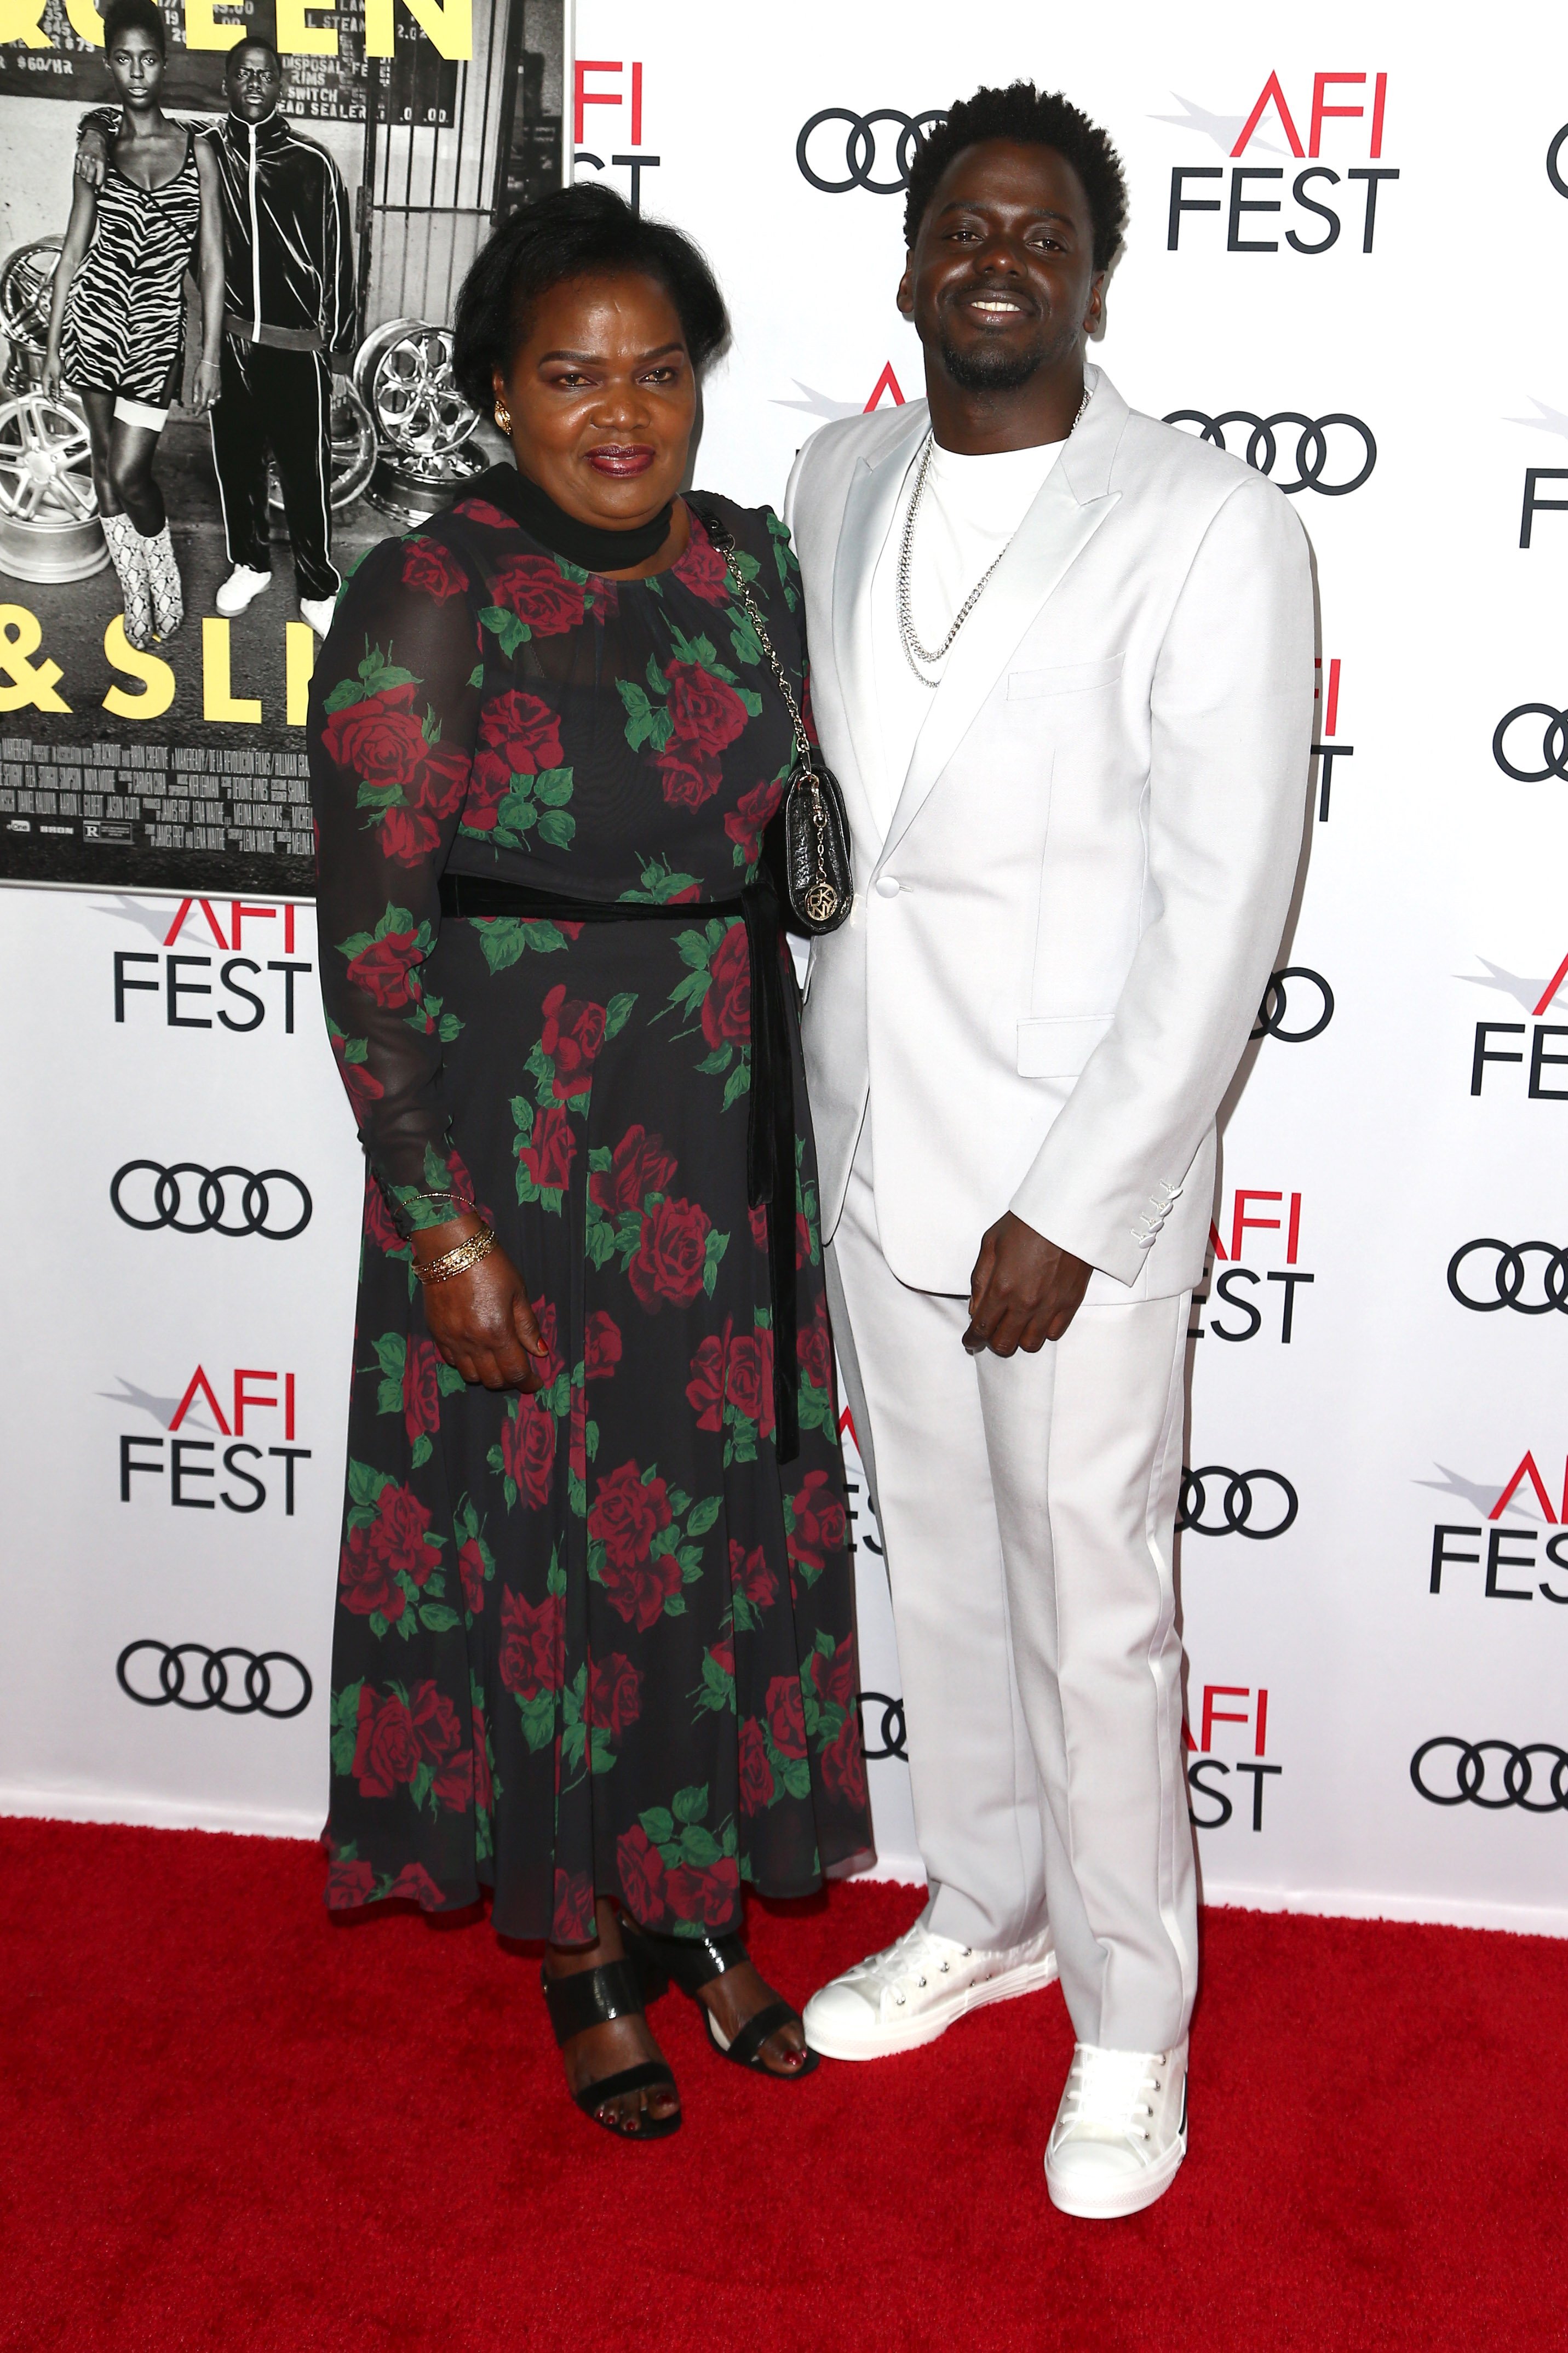 Daniel Kayuula and his mother, Damalie Namusoke, pictured at  AFI FEST 2019 Presented By Audi premiere of "Queen & Slim," 2019. | Photo: Getty Images